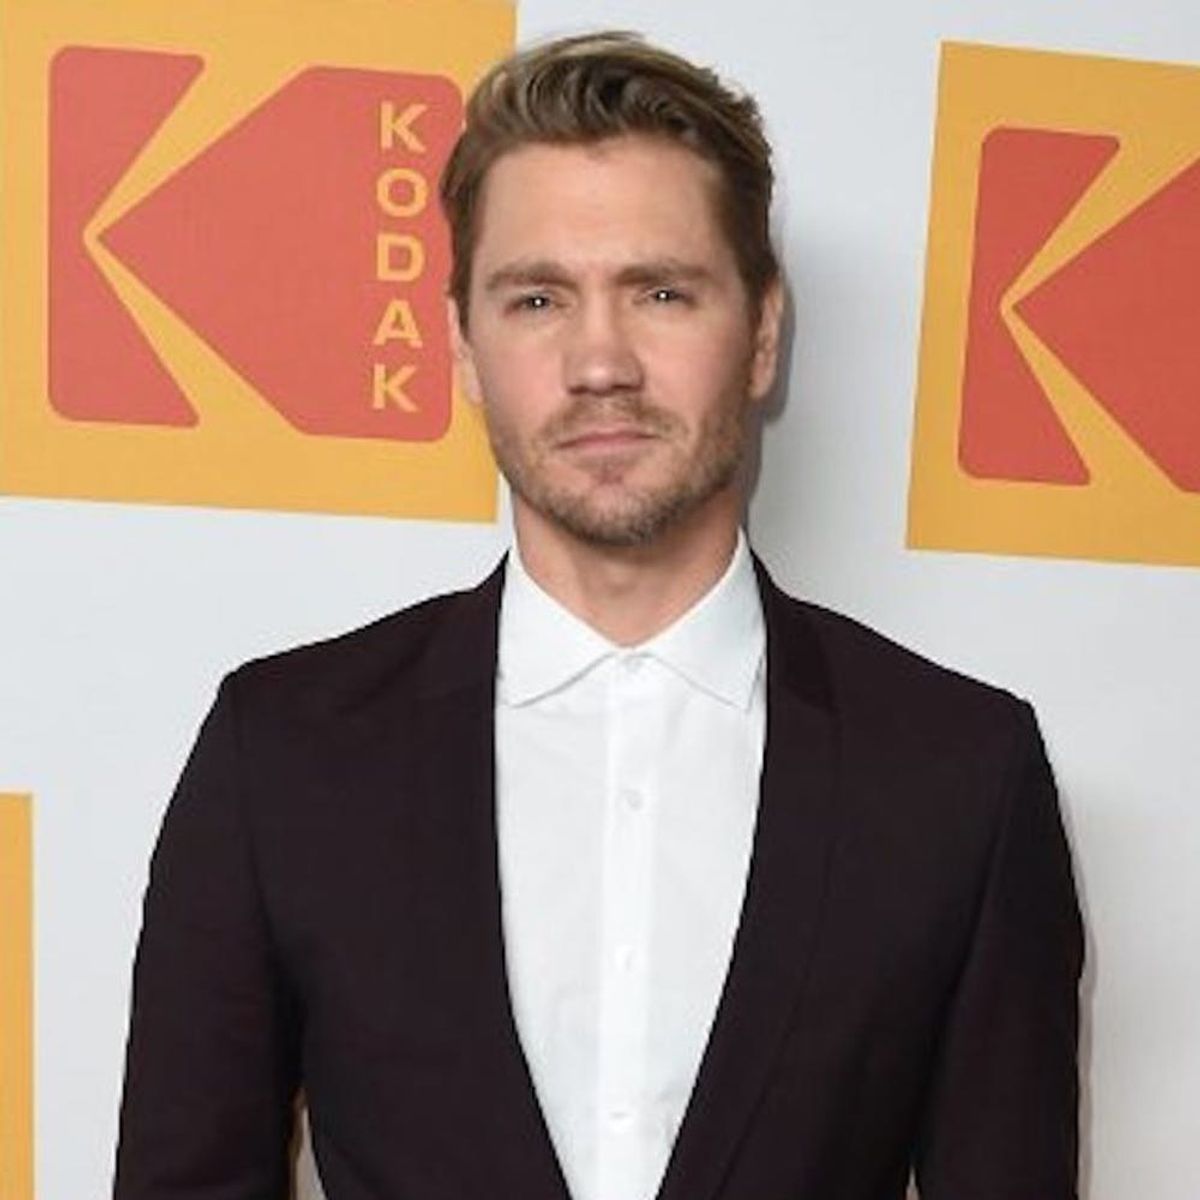 Chad Michael Murray Showed Up to a Children’s Hospital Prom As His Prince Charming Alter Ego